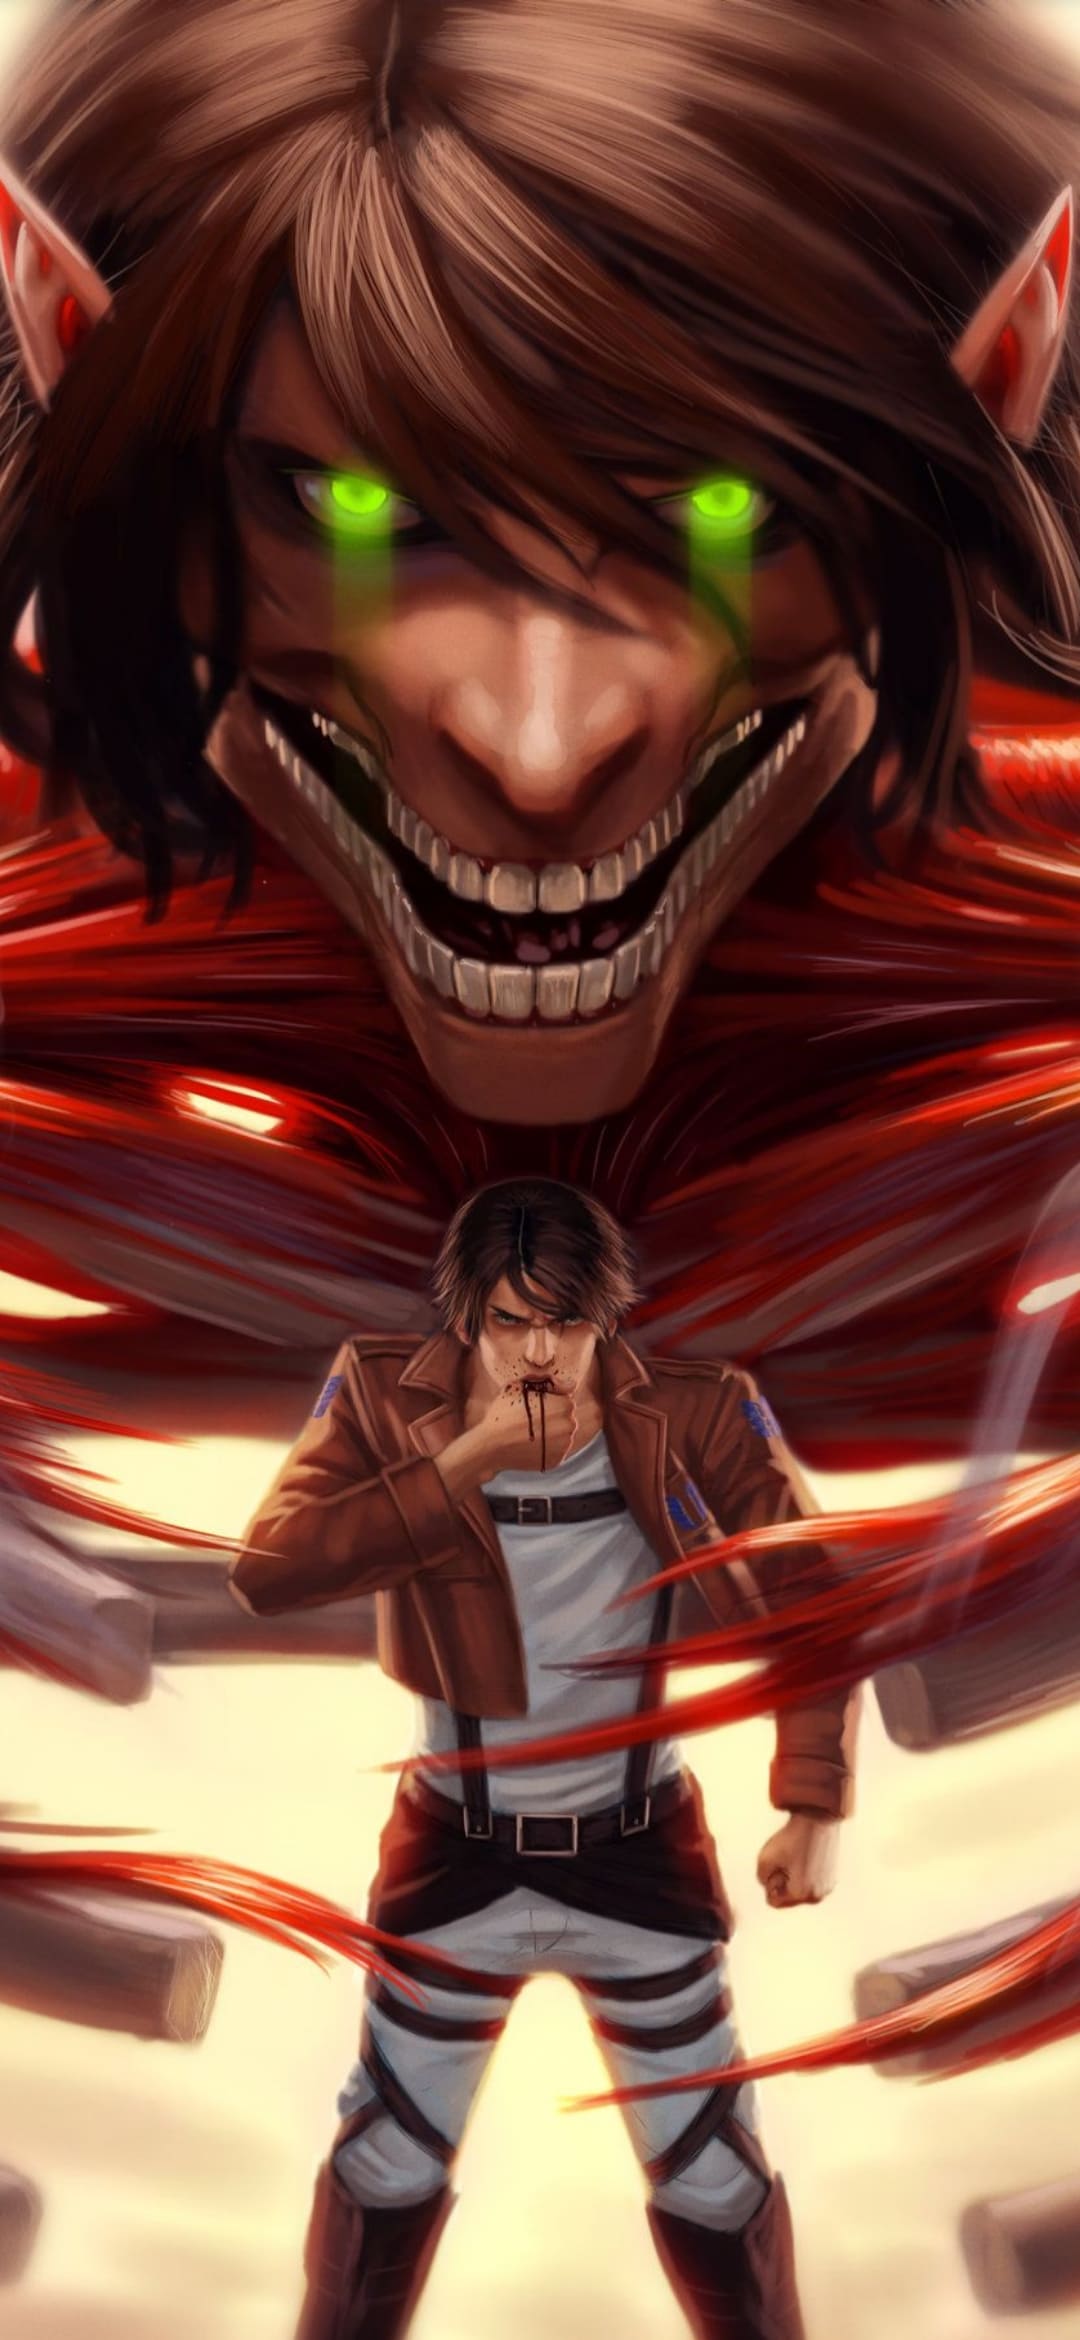 Attack On Titan iPhone Wallpaper Free iPhone Background Download